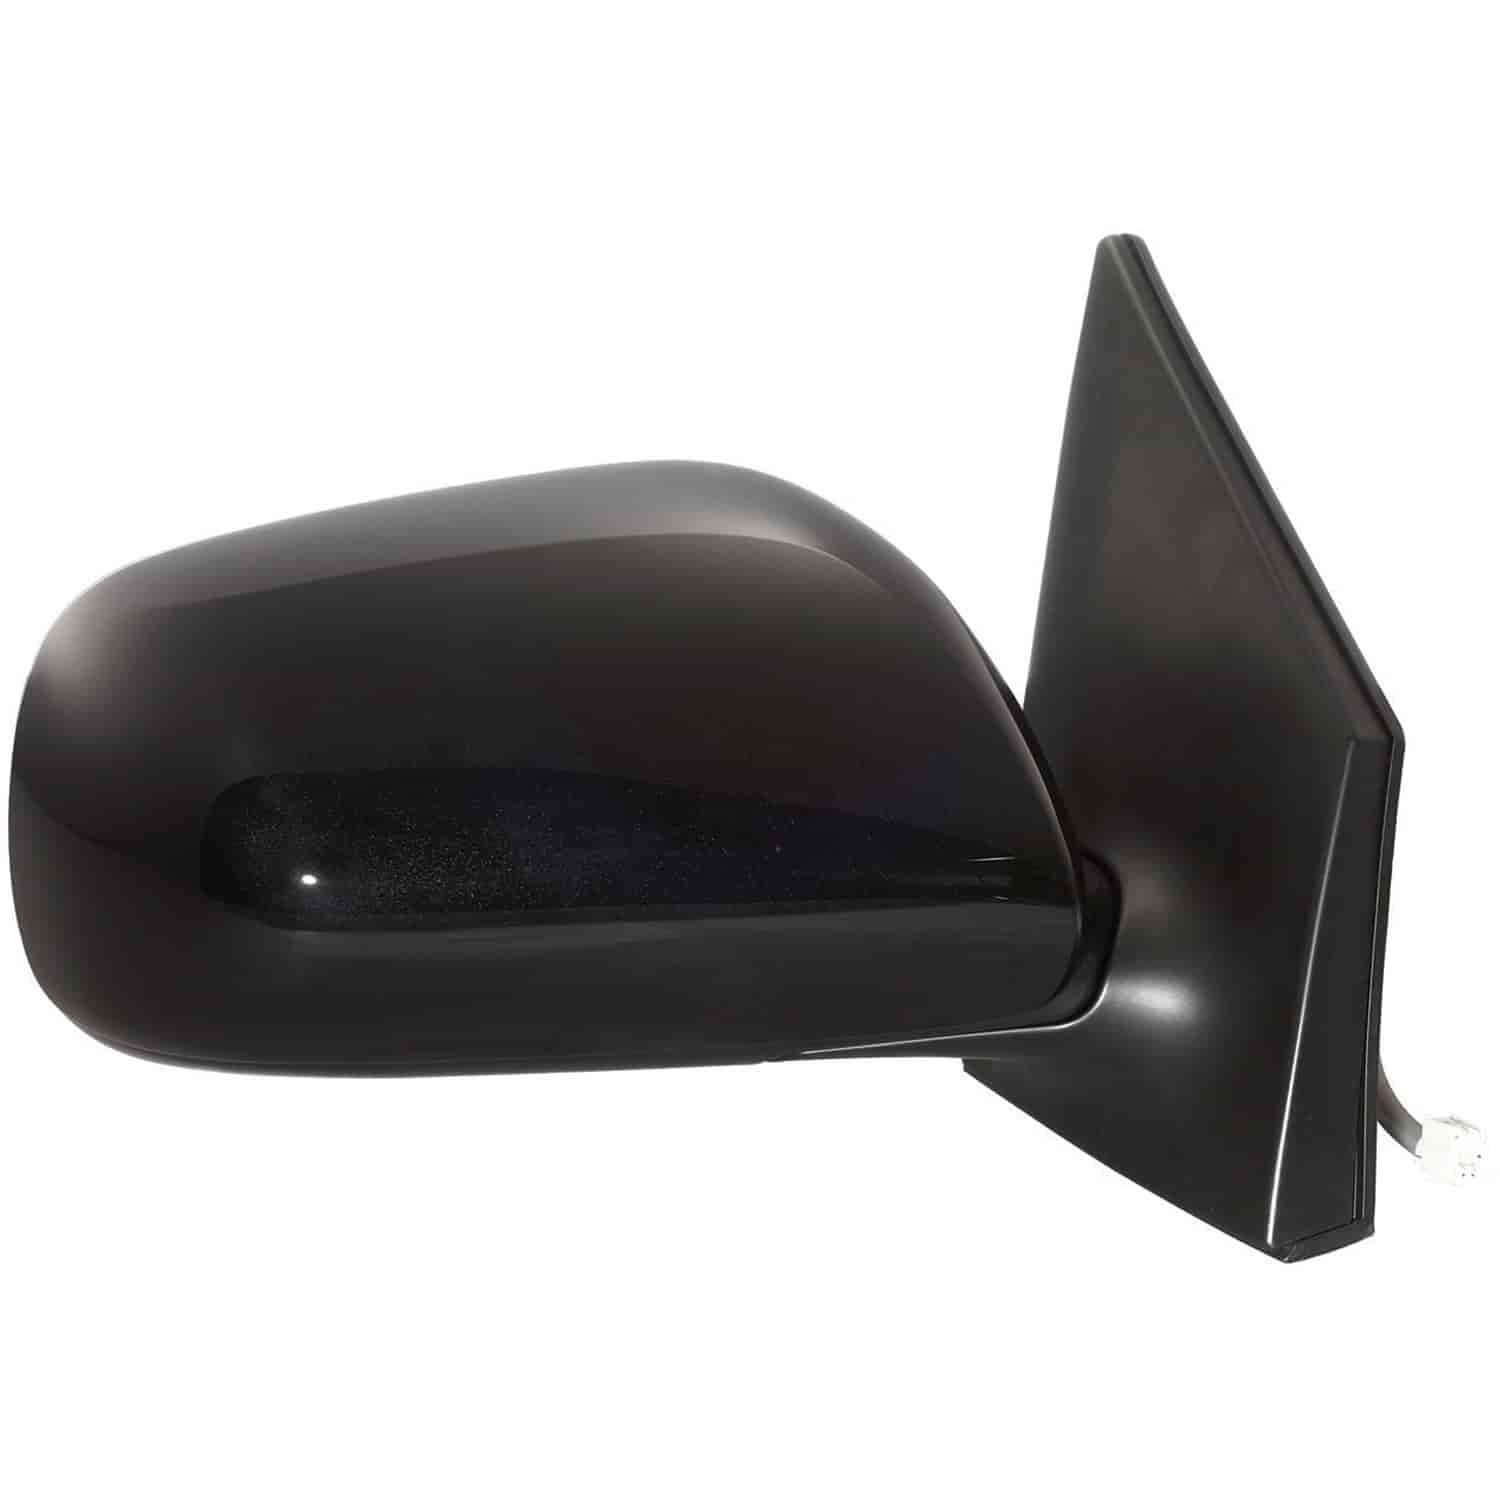 OEM Style Replacement mirror for 09-12 Toyota Corolla US built ; Toyota Corolla Japan built passenge